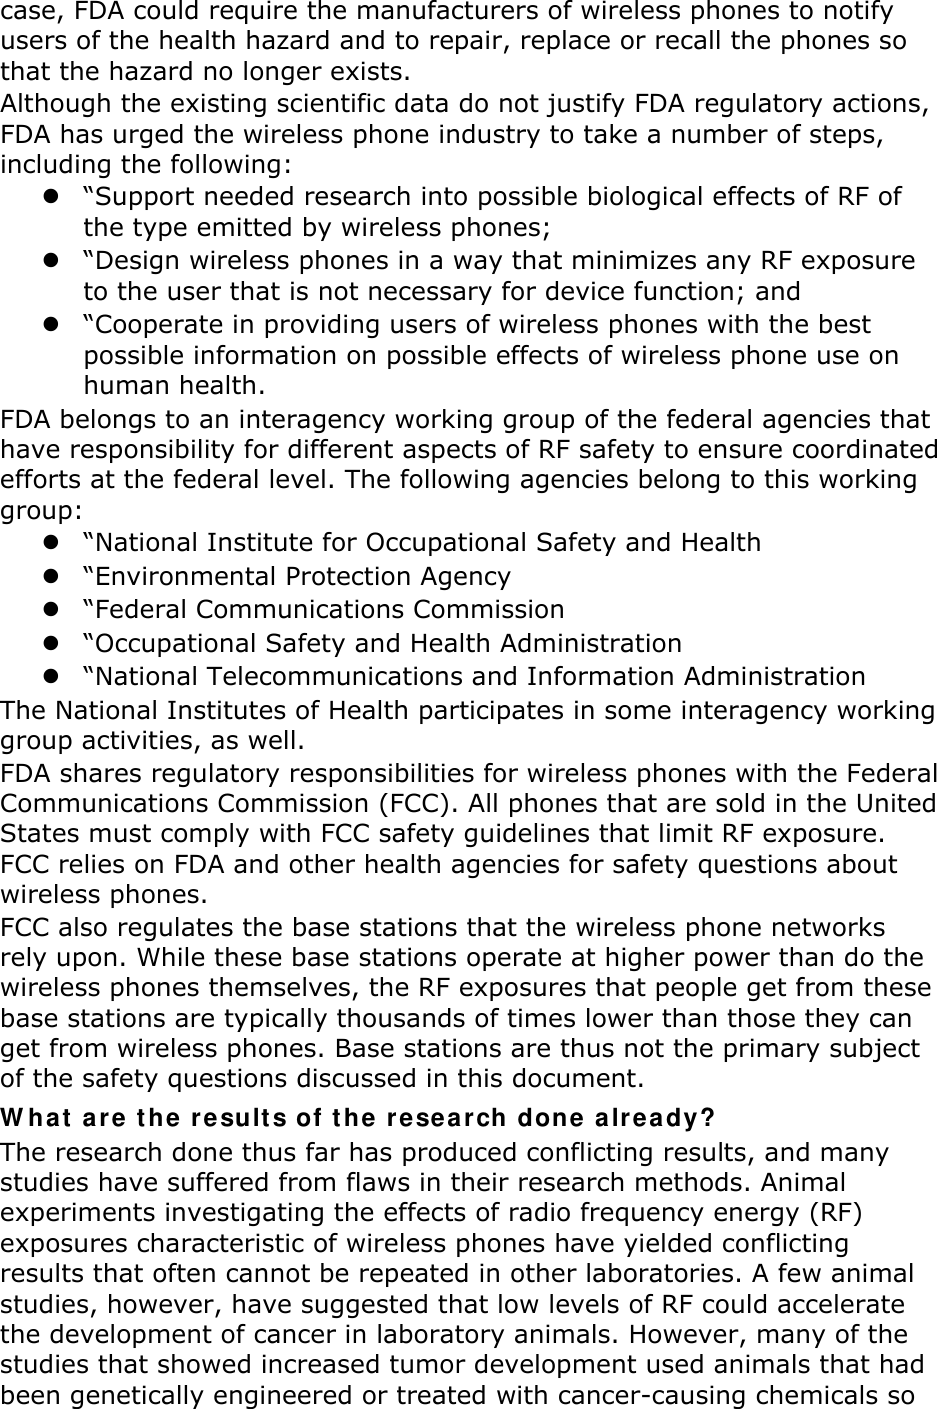 case, FDA could require the manufacturers of wireless phones to notify users of the health hazard and to repair, replace or recall the phones so that the hazard no longer exists. Although the existing scientific data do not justify FDA regulatory actions, FDA has urged the wireless phone industry to take a number of steps, including the following:  “Support needed research into possible biological effects of RF of the type emitted by wireless phones;  “Design wireless phones in a way that minimizes any RF exposure to the user that is not necessary for device function; and  “Cooperate in providing users of wireless phones with the best possible information on possible effects of wireless phone use on human health. FDA belongs to an interagency working group of the federal agencies that have responsibility for different aspects of RF safety to ensure coordinated efforts at the federal level. The following agencies belong to this working group:  “National Institute for Occupational Safety and Health  “Environmental Protection Agency  “Federal Communications Commission  “Occupational Safety and Health Administration  “National Telecommunications and Information Administration The National Institutes of Health participates in some interagency working group activities, as well. FDA shares regulatory responsibilities for wireless phones with the Federal Communications Commission (FCC). All phones that are sold in the United States must comply with FCC safety guidelines that limit RF exposure. FCC relies on FDA and other health agencies for safety questions about wireless phones. FCC also regulates the base stations that the wireless phone networks rely upon. While these base stations operate at higher power than do the wireless phones themselves, the RF exposures that people get from these base stations are typically thousands of times lower than those they can get from wireless phones. Base stations are thus not the primary subject of the safety questions discussed in this document. W hat ar e t he result s of t he  re sear ch done already? The research done thus far has produced conflicting results, and many studies have suffered from flaws in their research methods. Animal experiments investigating the effects of radio frequency energy (RF) exposures characteristic of wireless phones have yielded conflicting results that often cannot be repeated in other laboratories. A few animal studies, however, have suggested that low levels of RF could accelerate the development of cancer in laboratory animals. However, many of the studies that showed increased tumor development used animals that had been genetically engineered or treated with cancer-causing chemicals so 